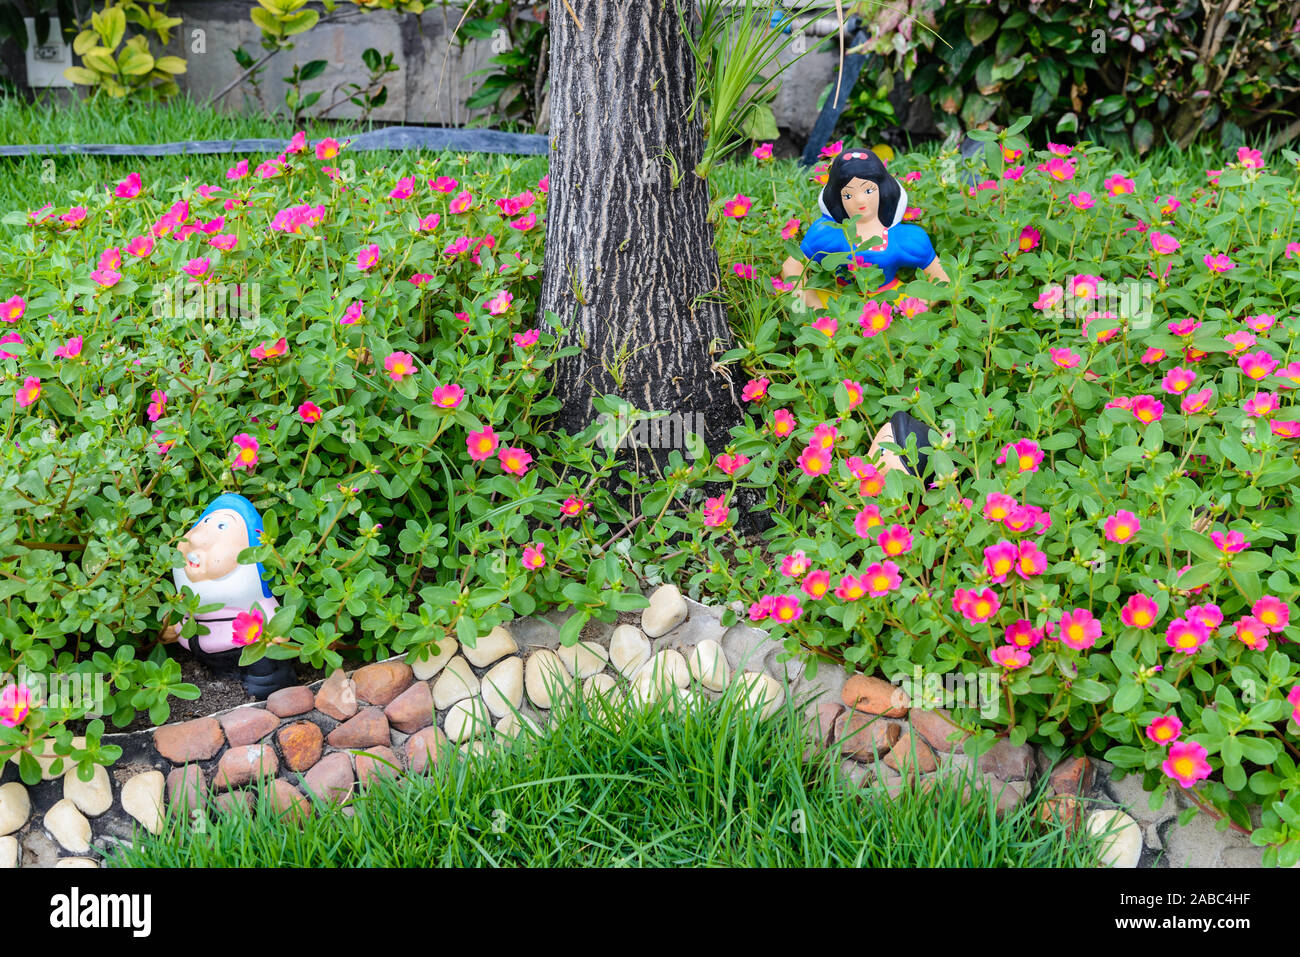 Figurines of Snow White and the Dwarves in a flower garden. Brazil, South America. Stock Photo